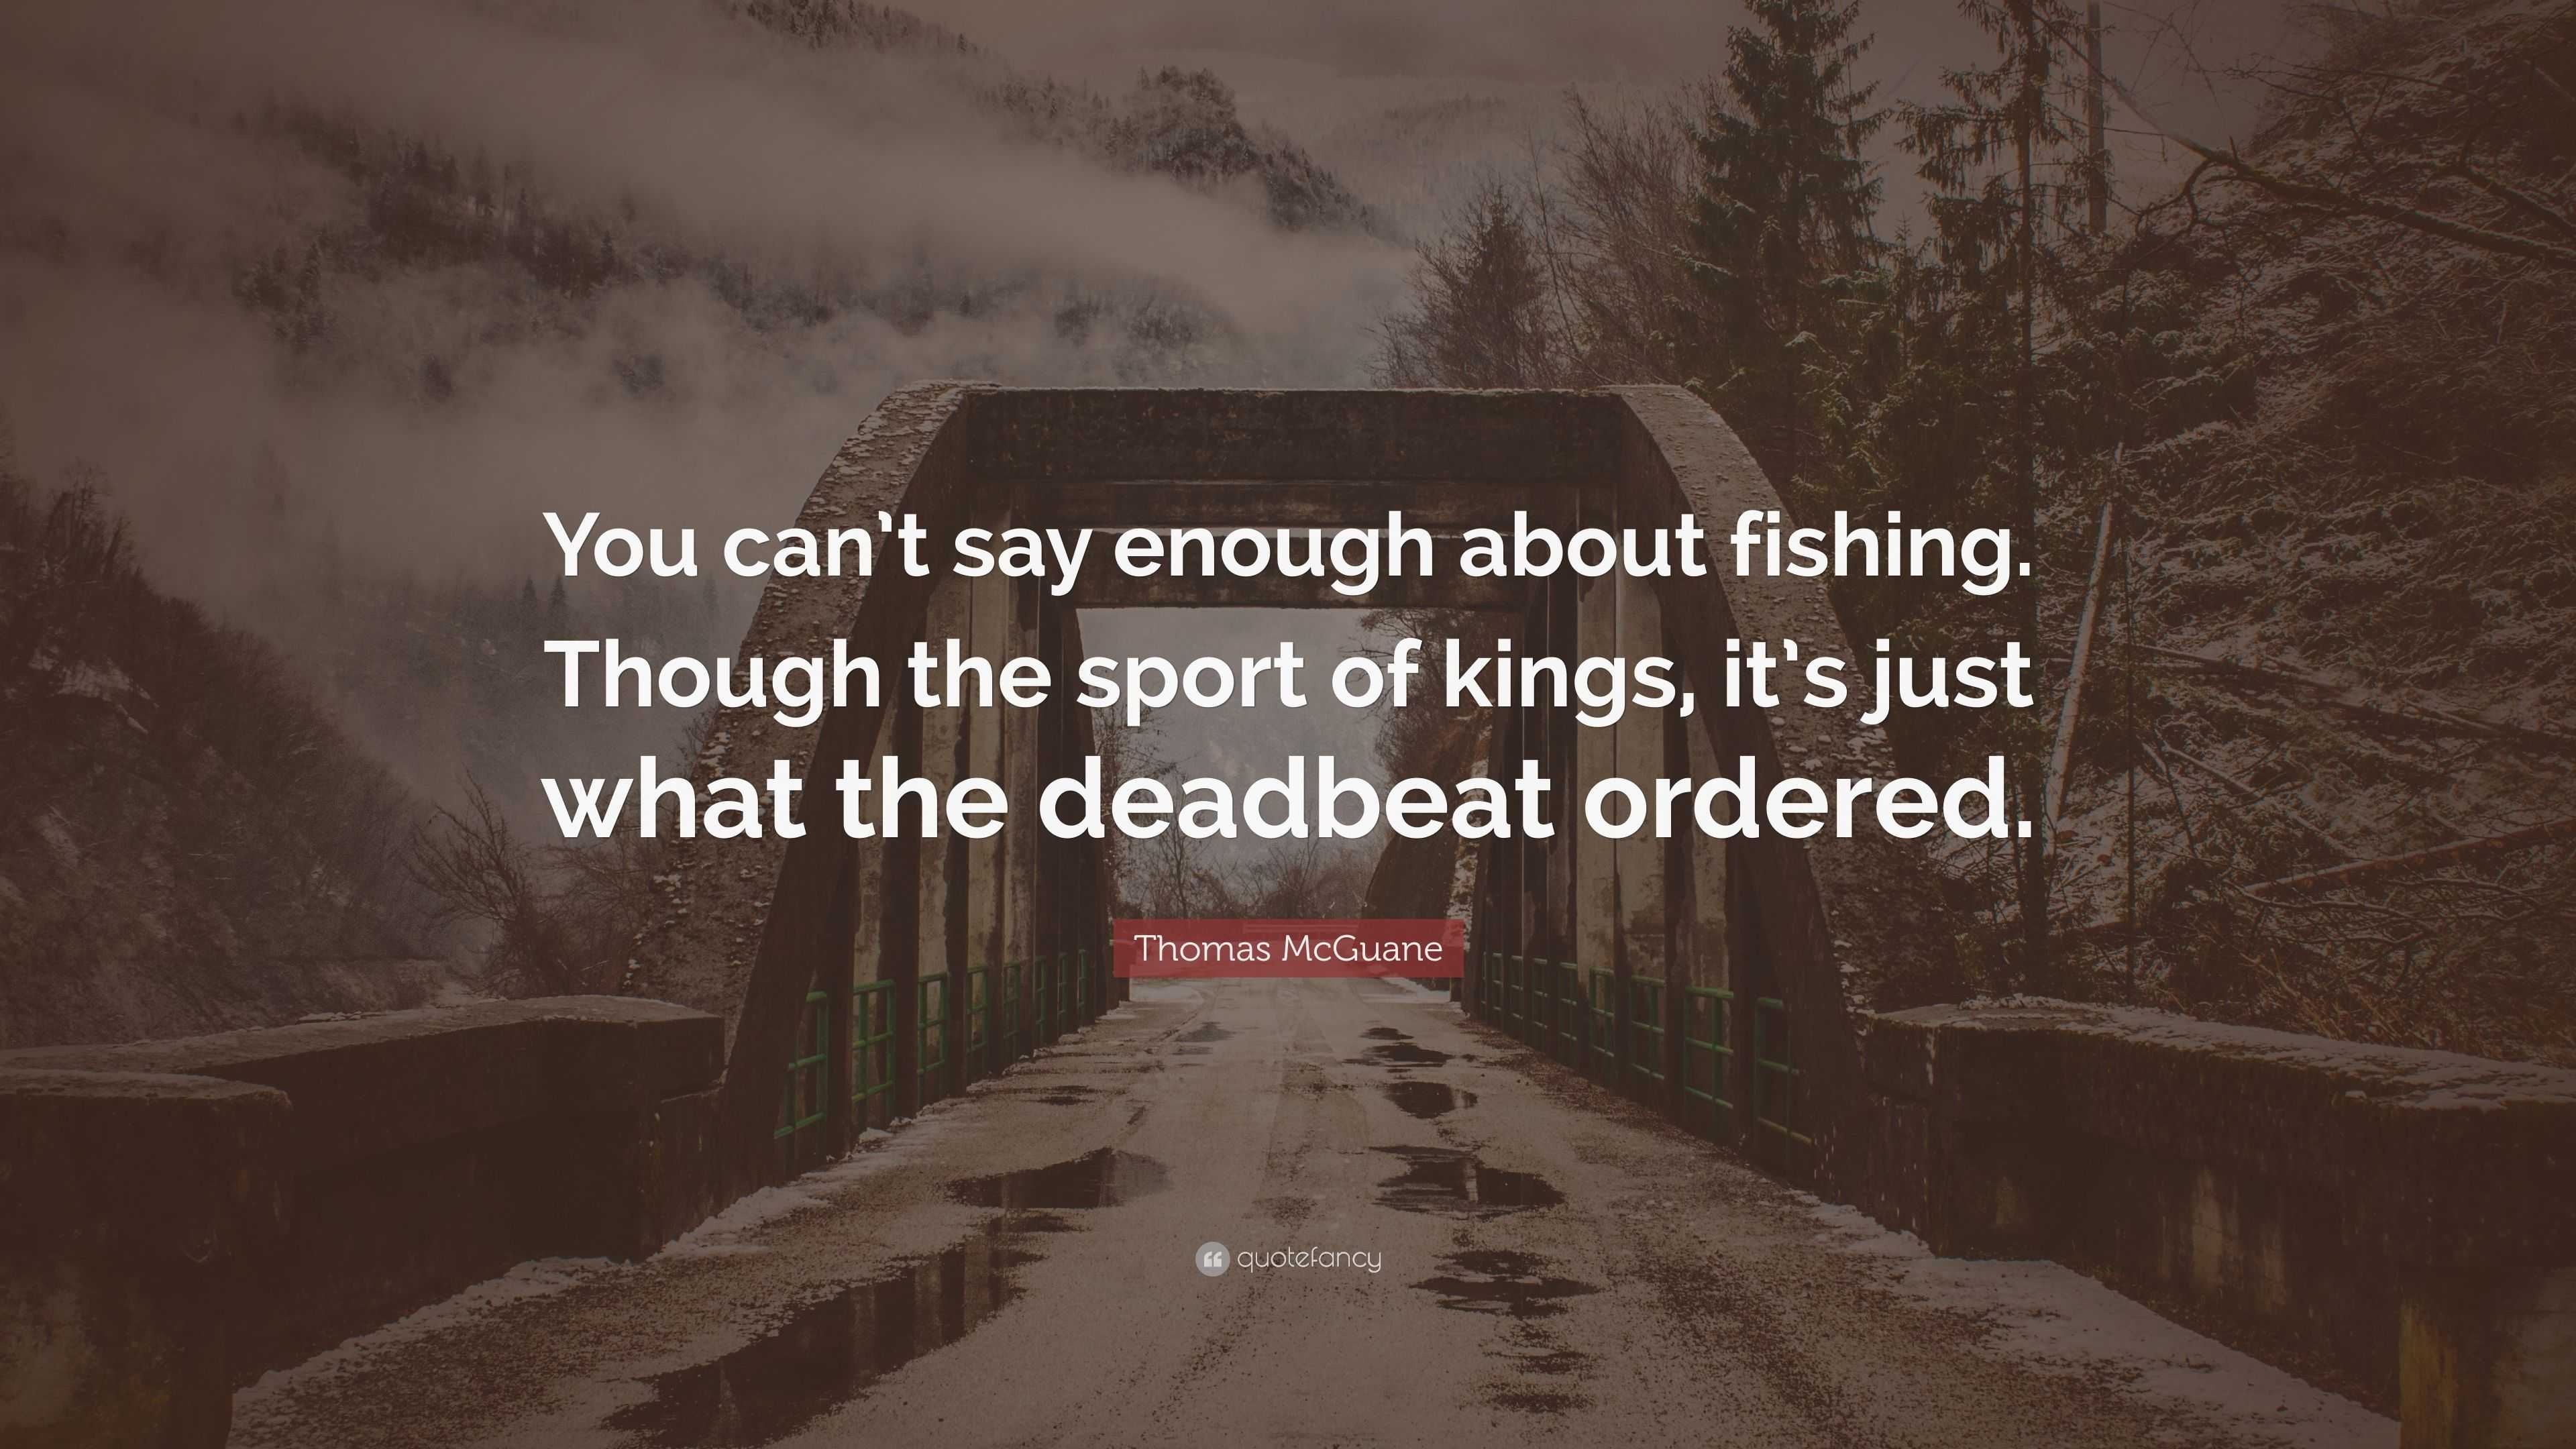 Fishing is the sport of kings and paupers alike. But you don't